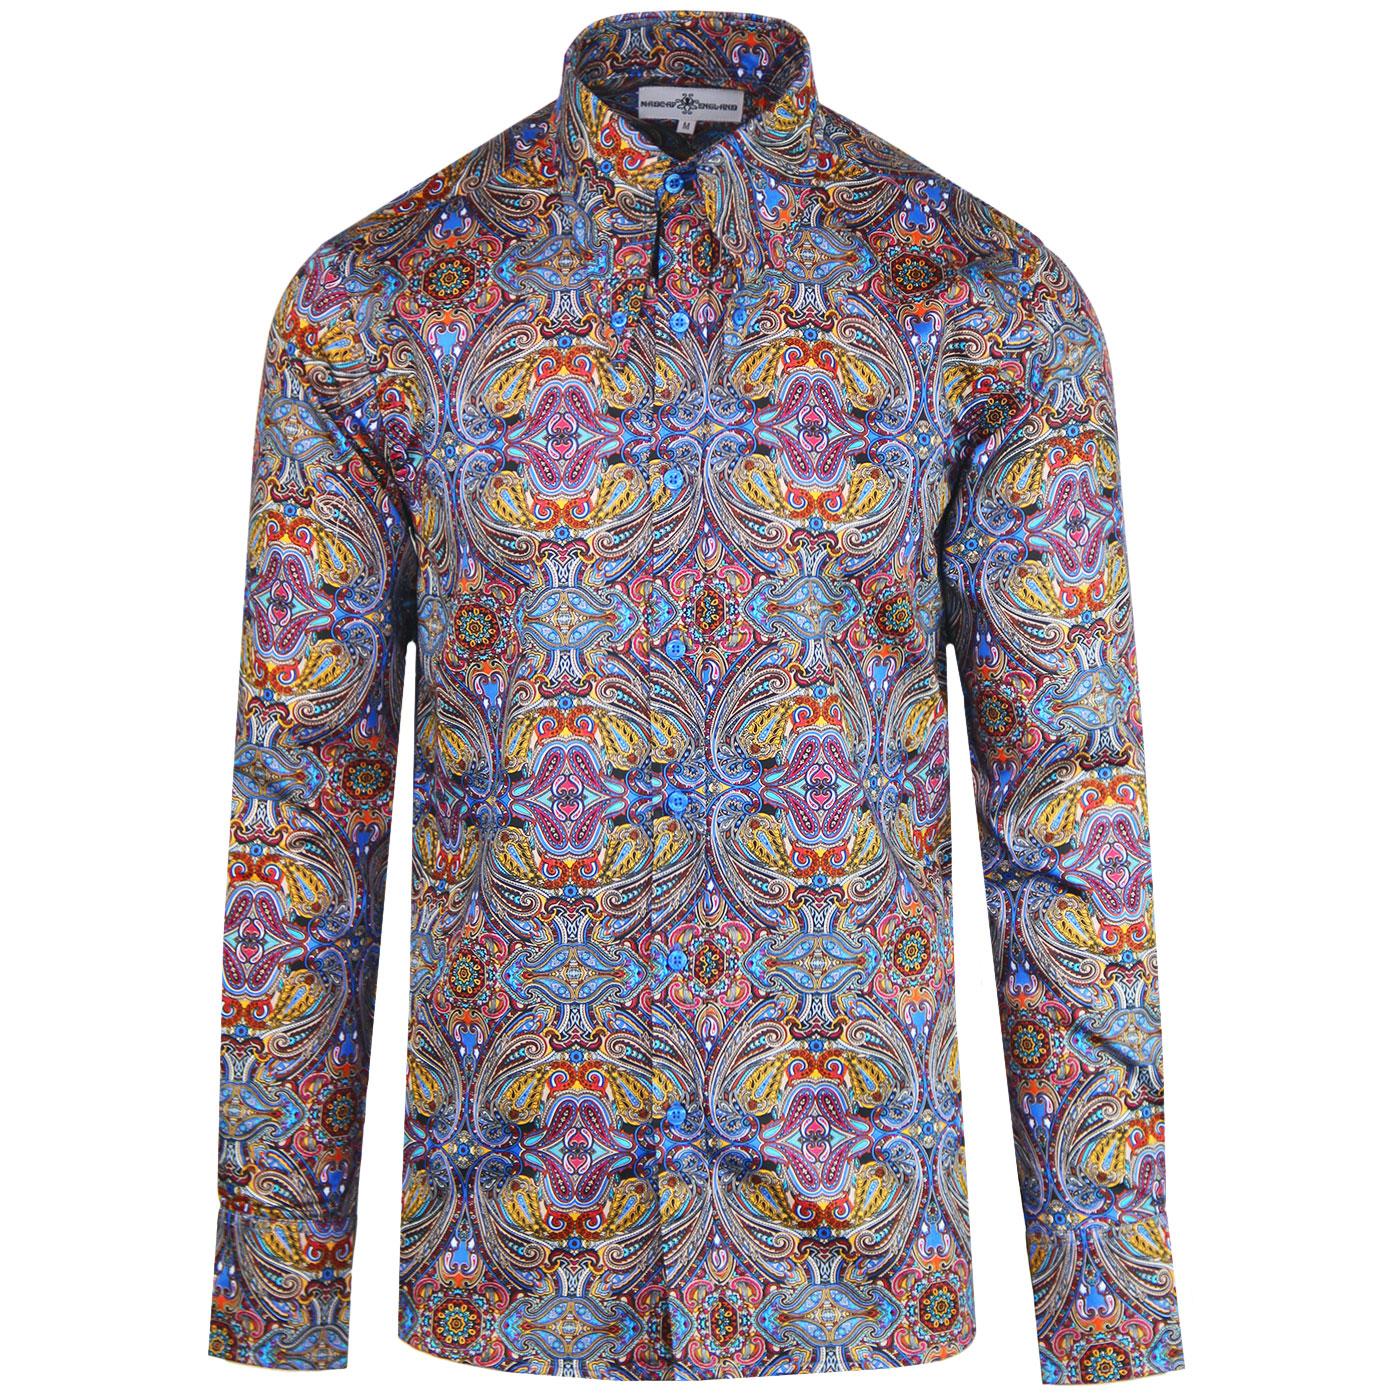 Madcap England Capo 1960s Mod Psychedelic Paisley Spear Collar Shirt in Blue